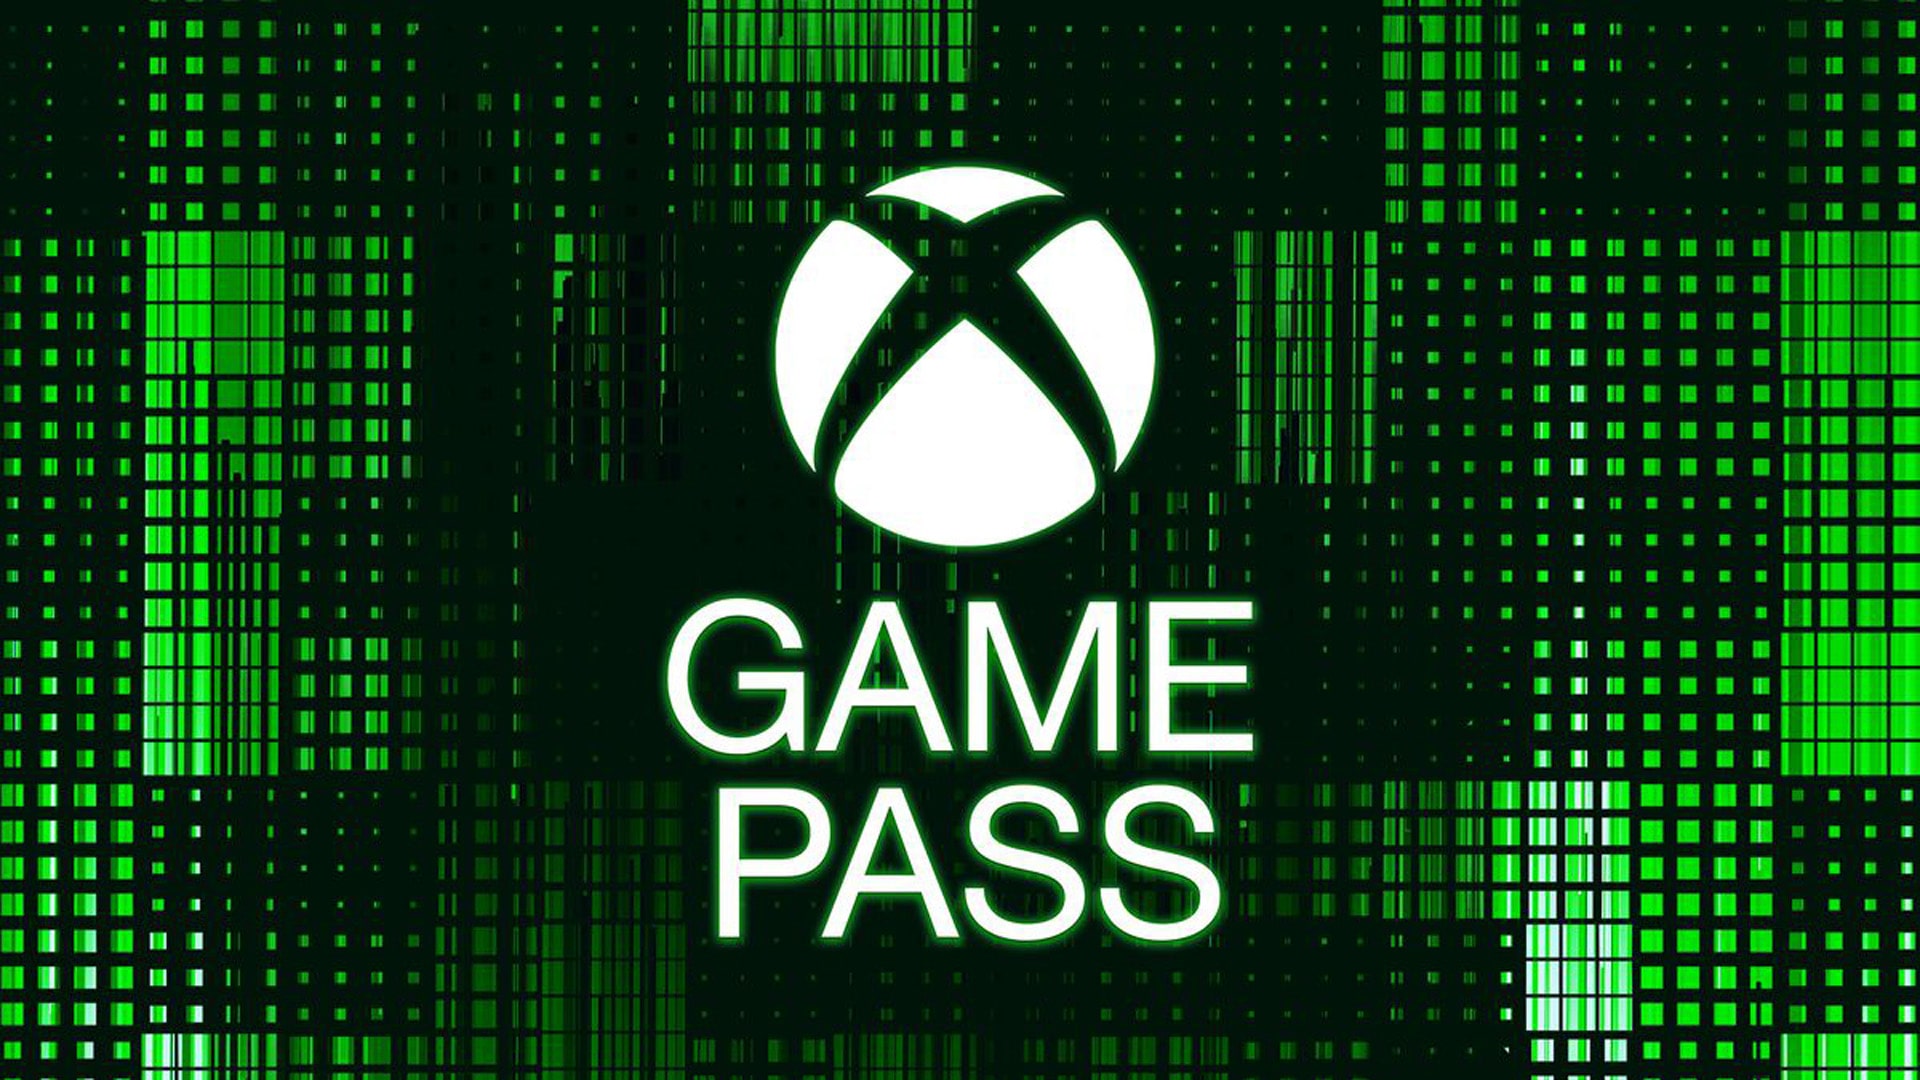 Interface display of the Xbox Game Pass service.